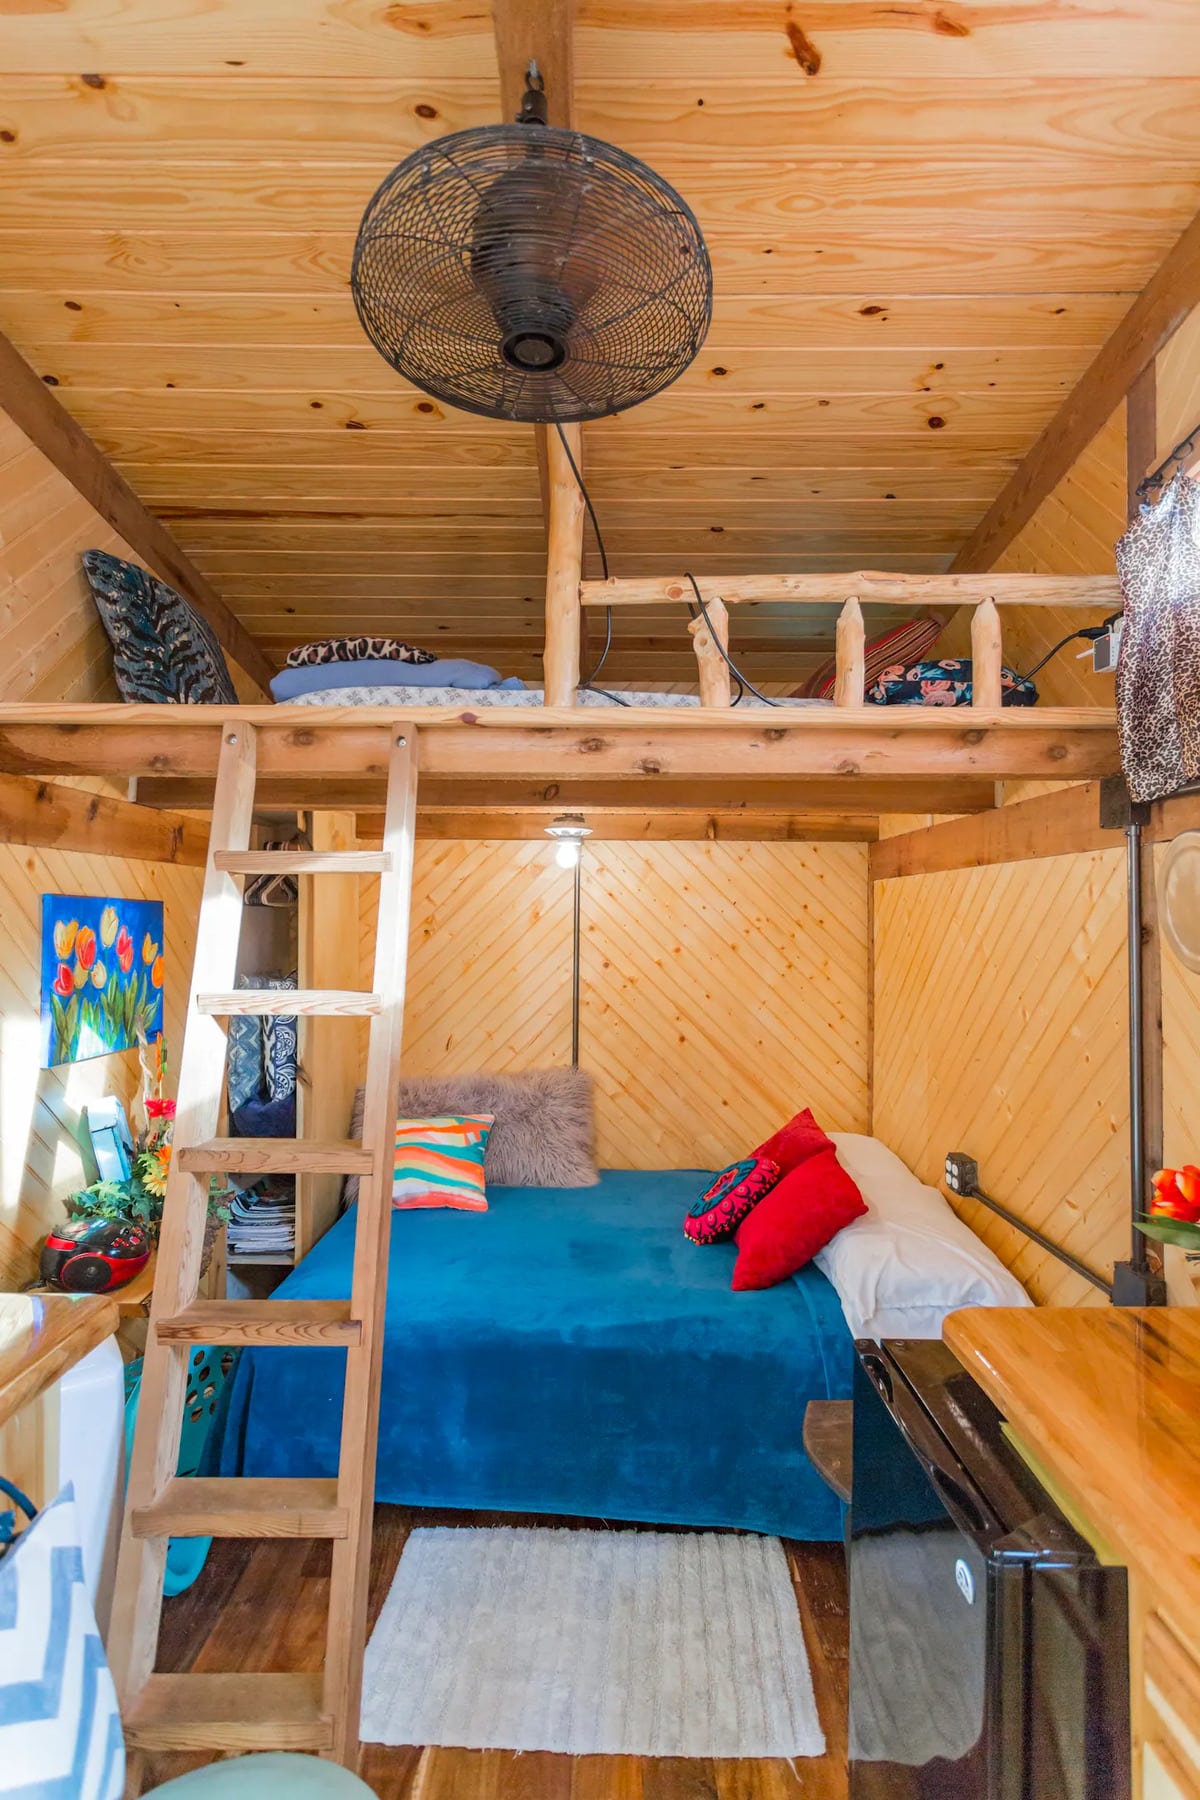 Two double beds, one at ground level and one in bunk accessible via ladder